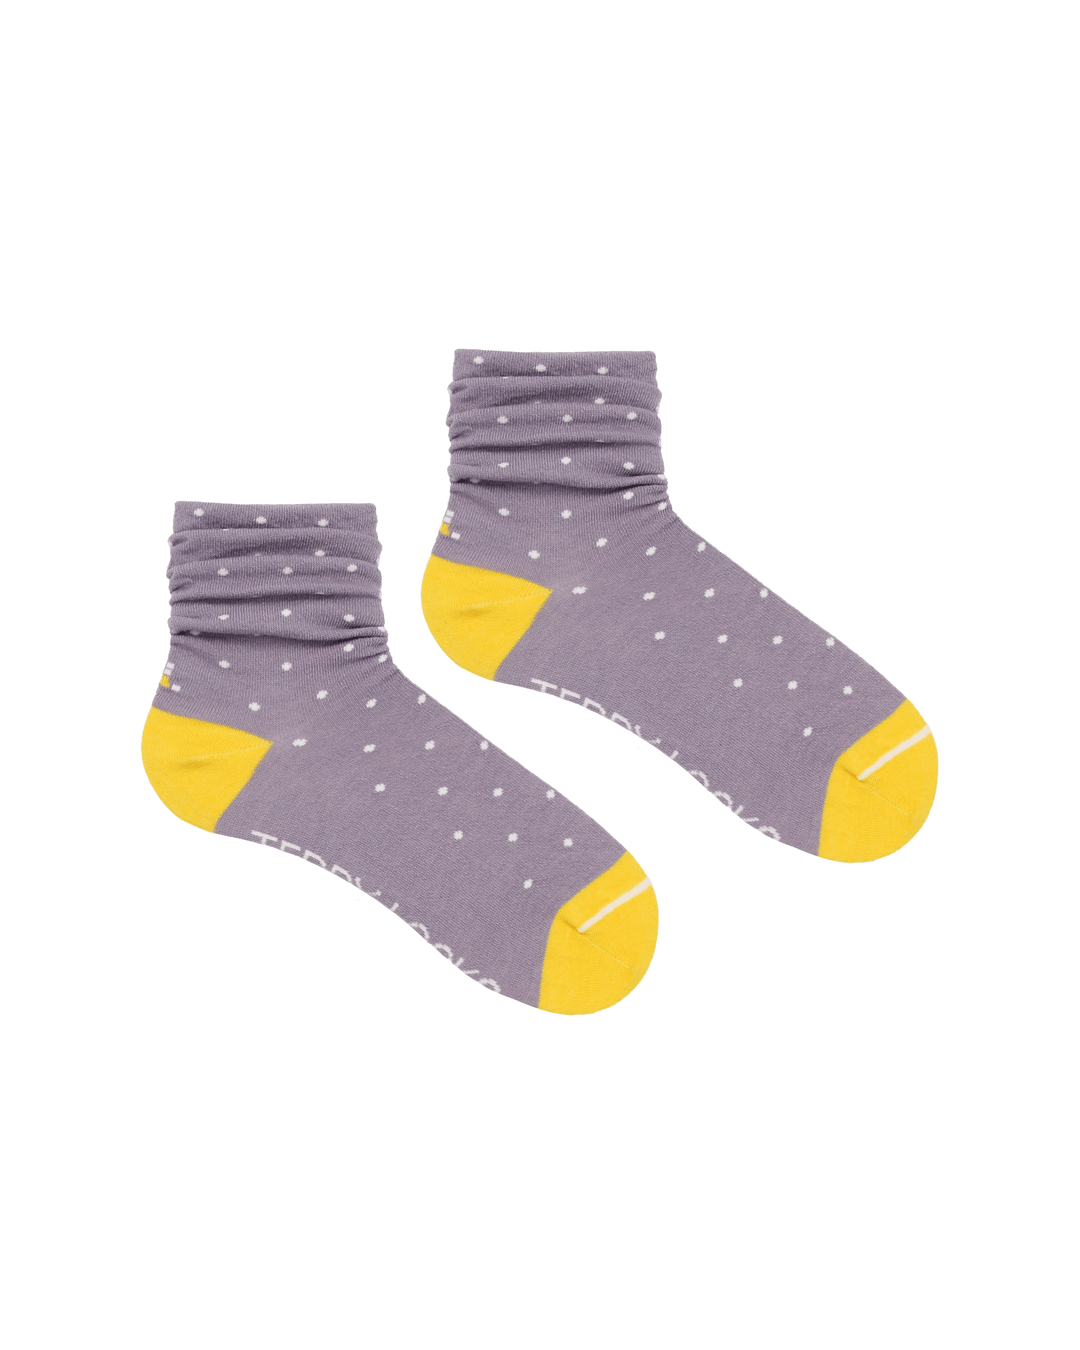 Sustainable slouch socks. Lilac socks with yellow toes. 